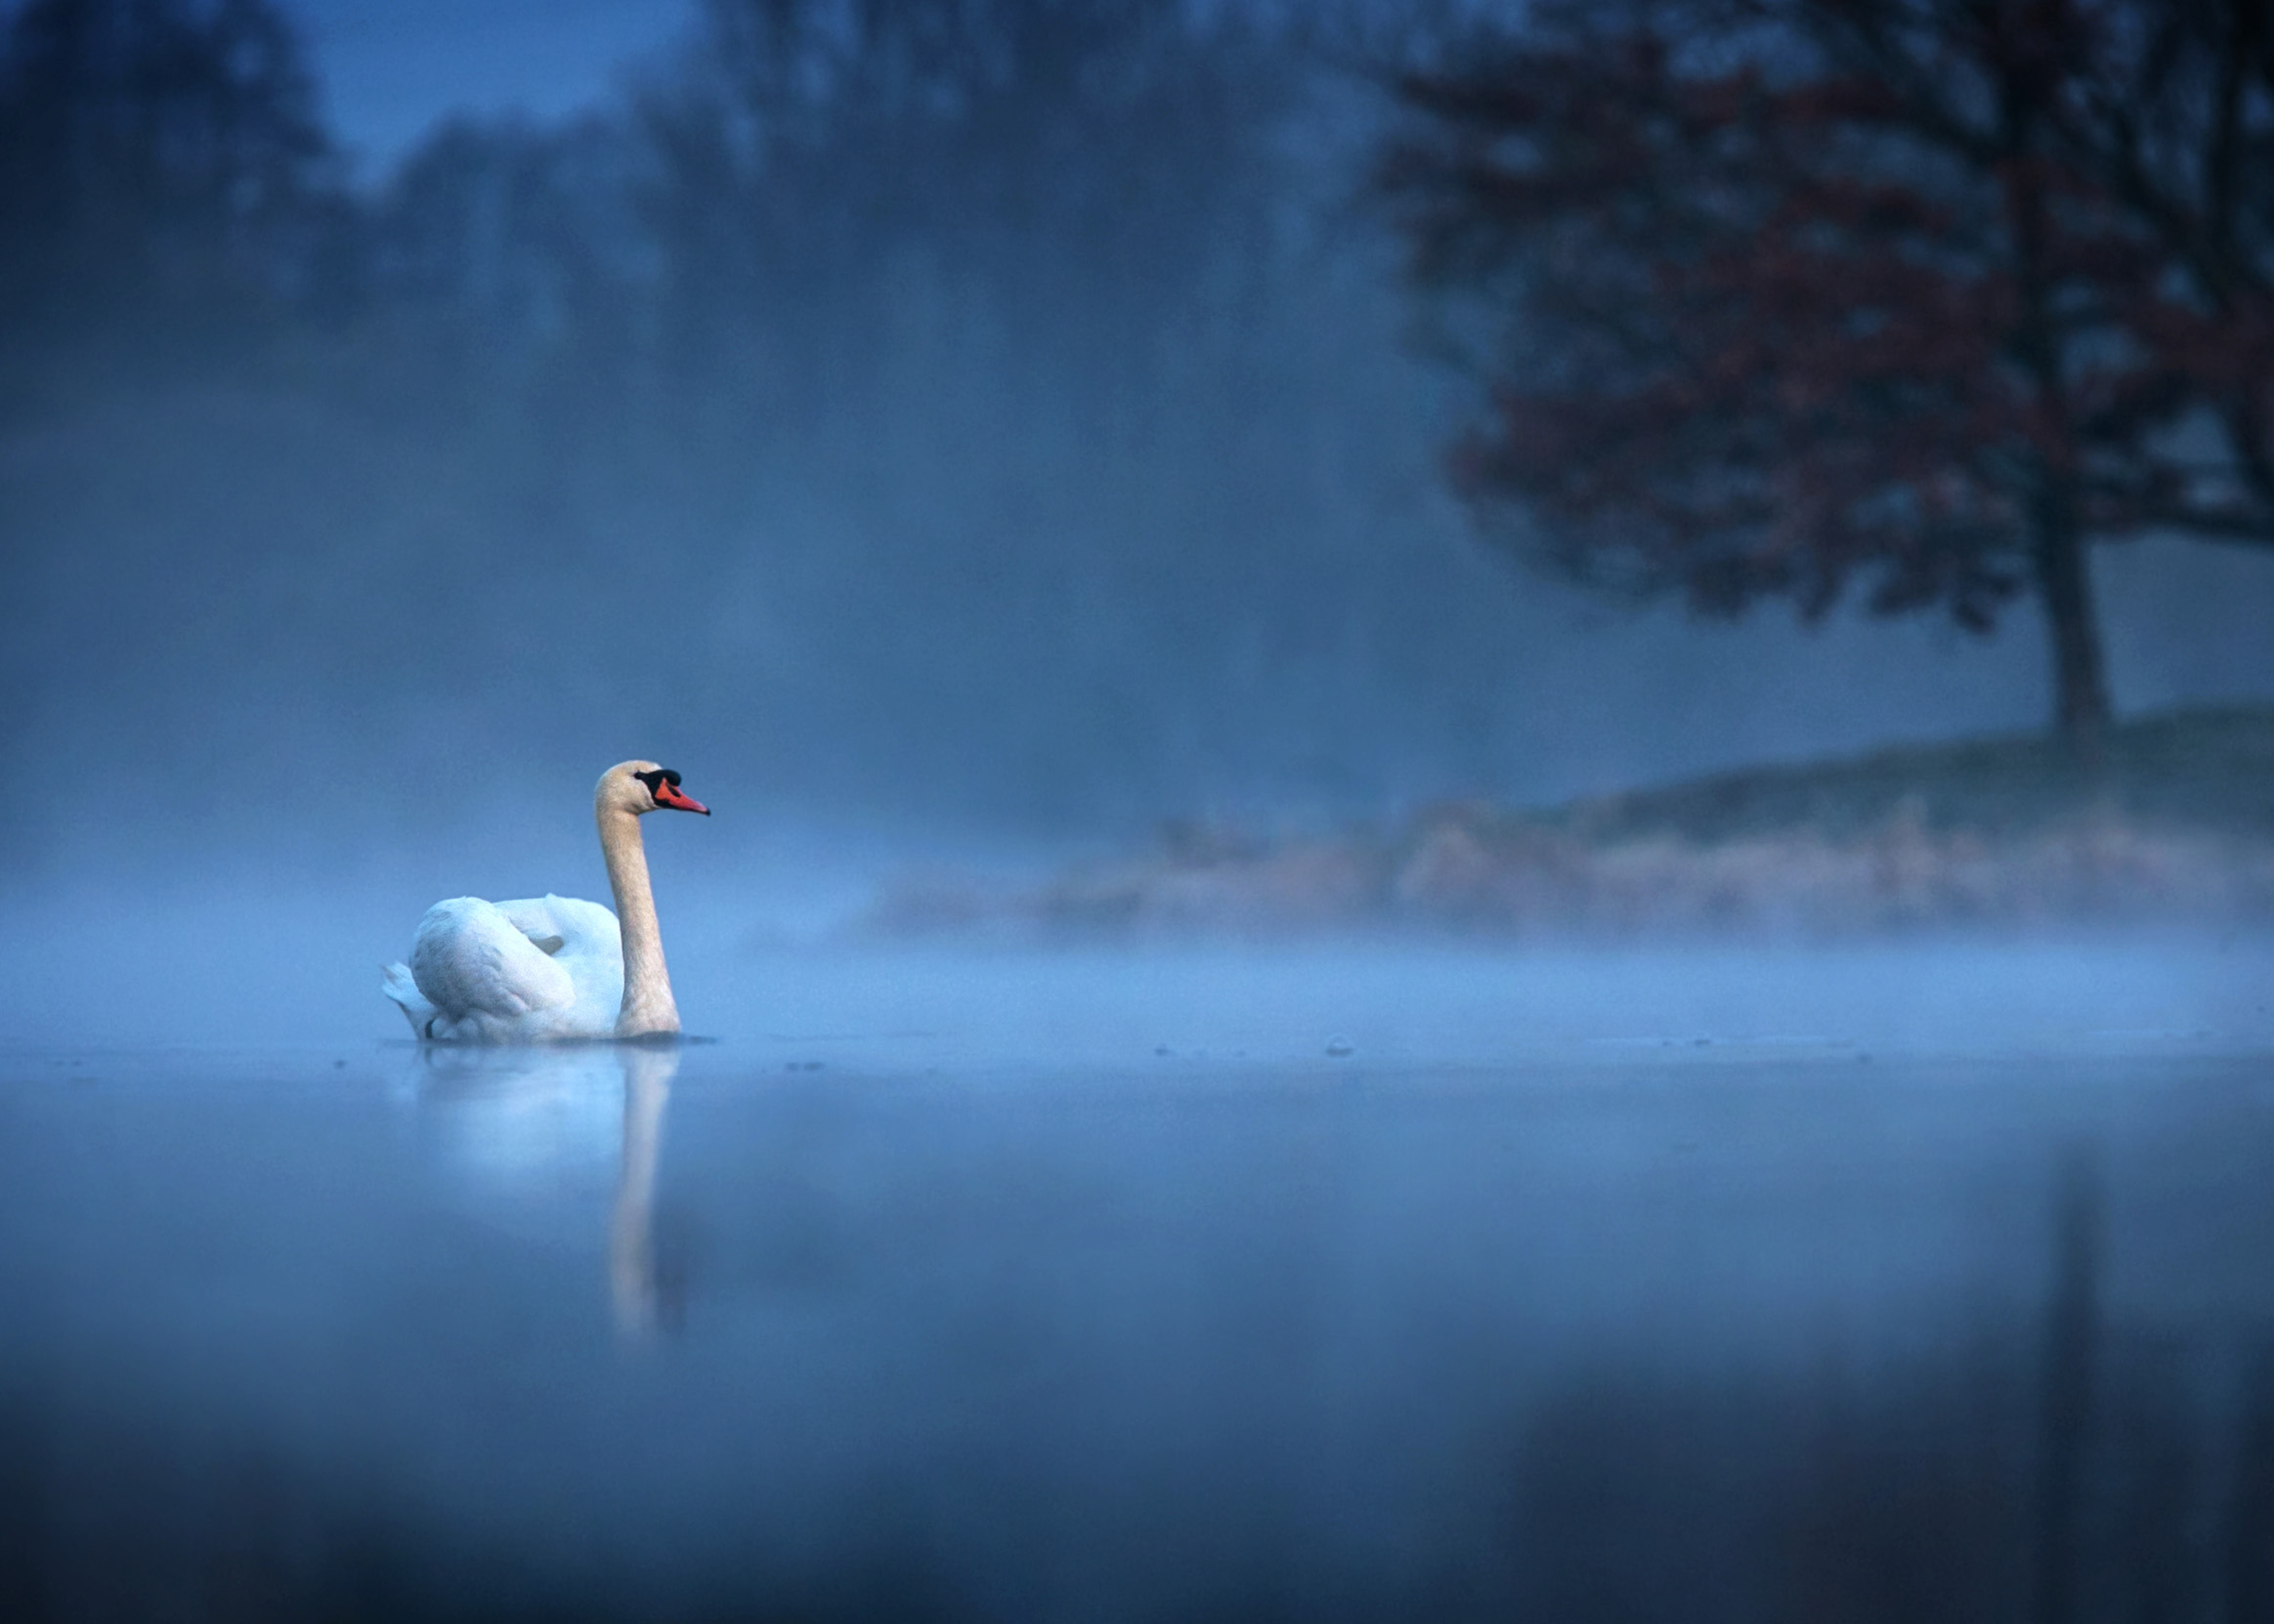 A Mute Swan swimming on a lake in misty early morning light.